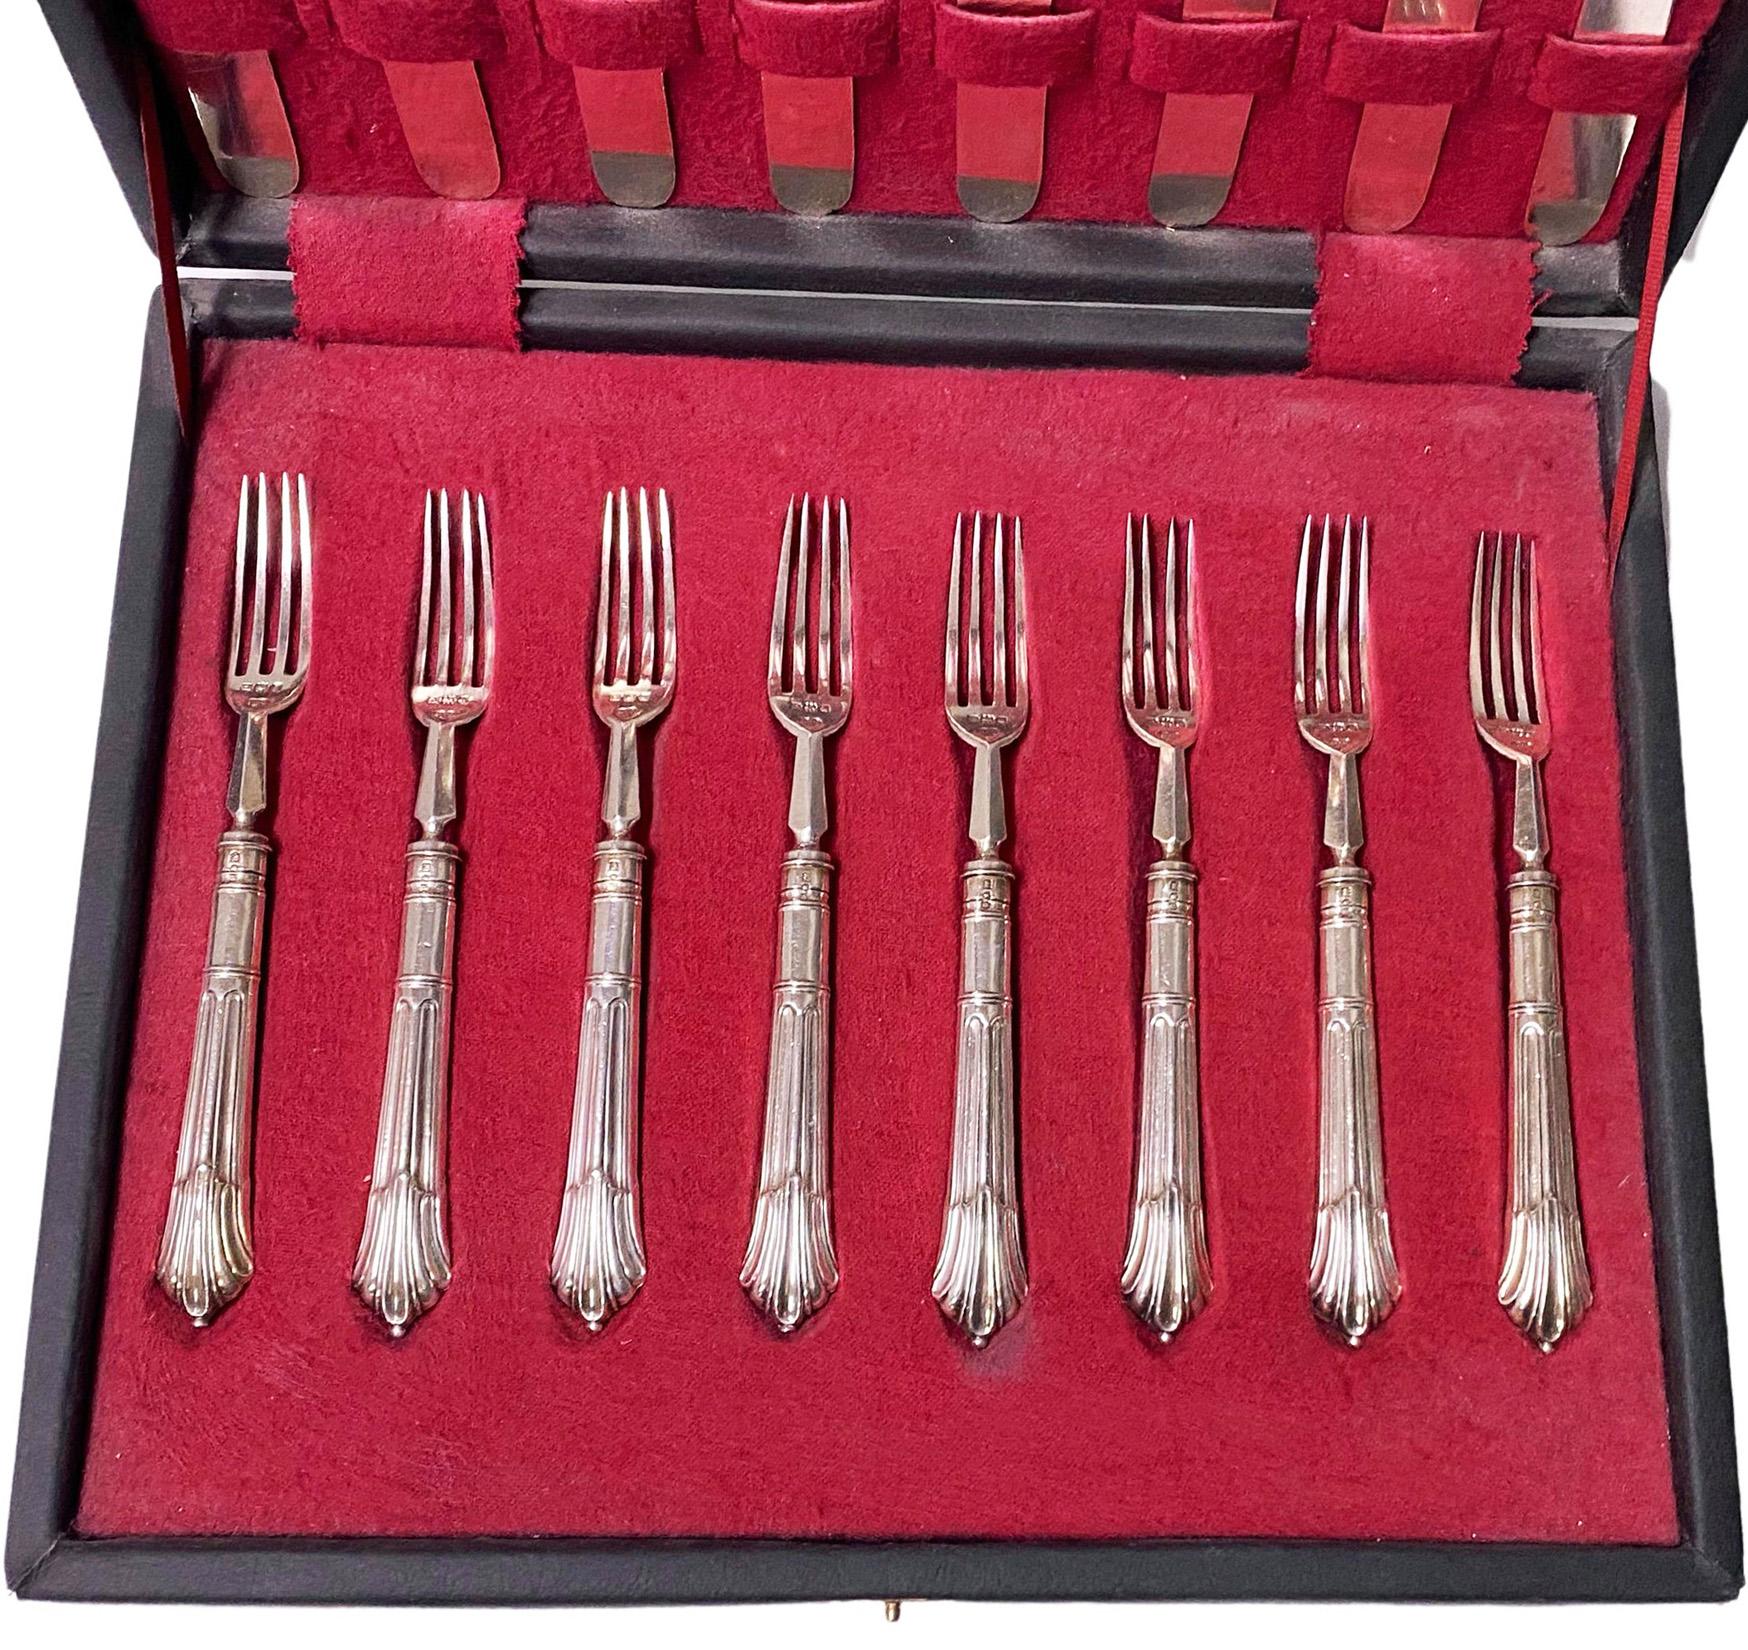 Antique Silver Albany Dessert Service London 1899 Goldsmiths & Silversmiths Co In Good Condition For Sale In Toronto, Ontario